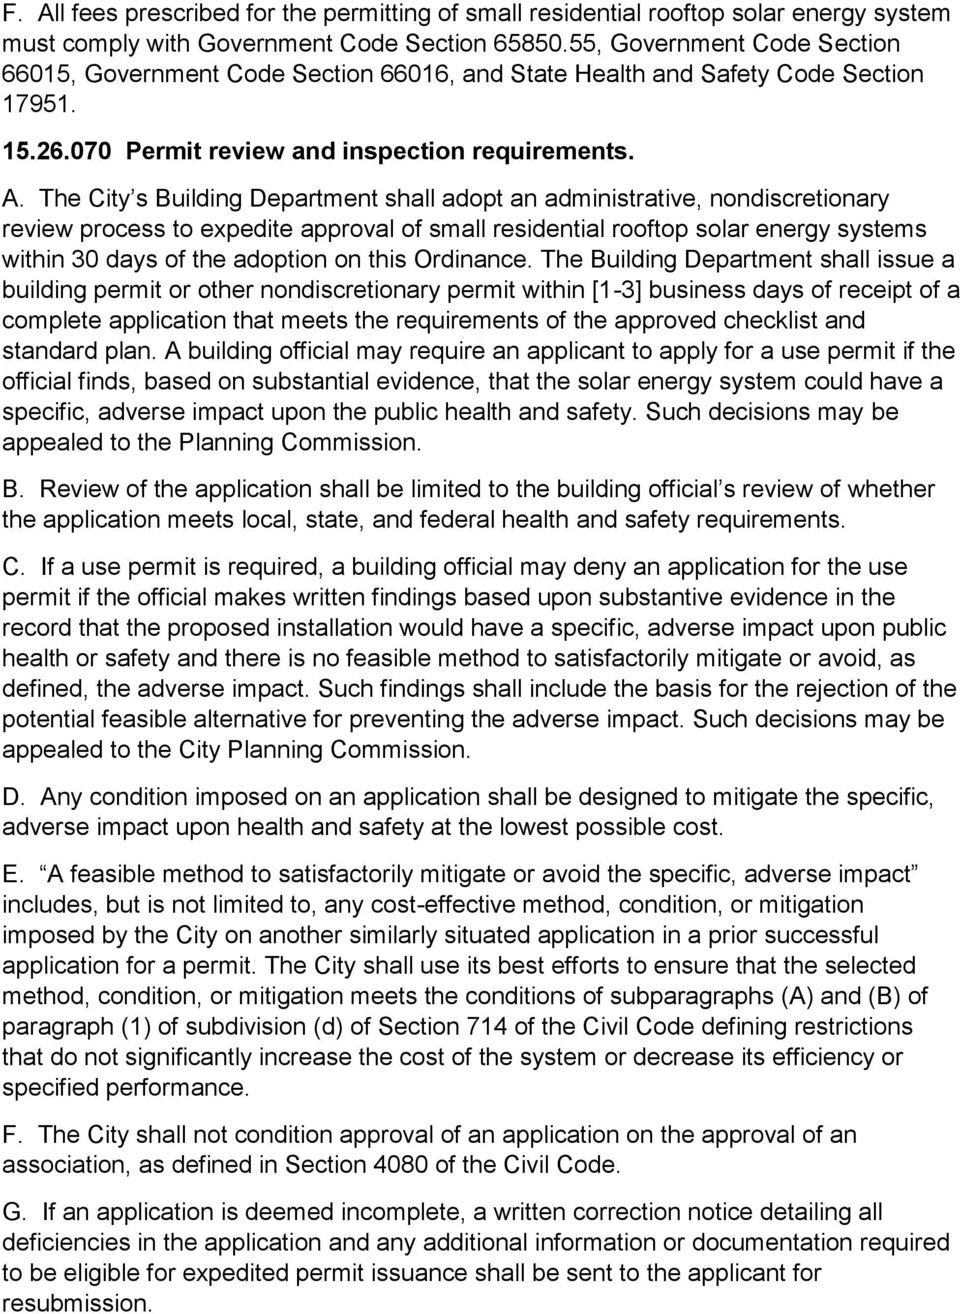 The City s Building Department shall adopt an administrative, nondiscretionary review process to expedite approval of small residential rooftop solar energy systems within 30 days of the adoption on